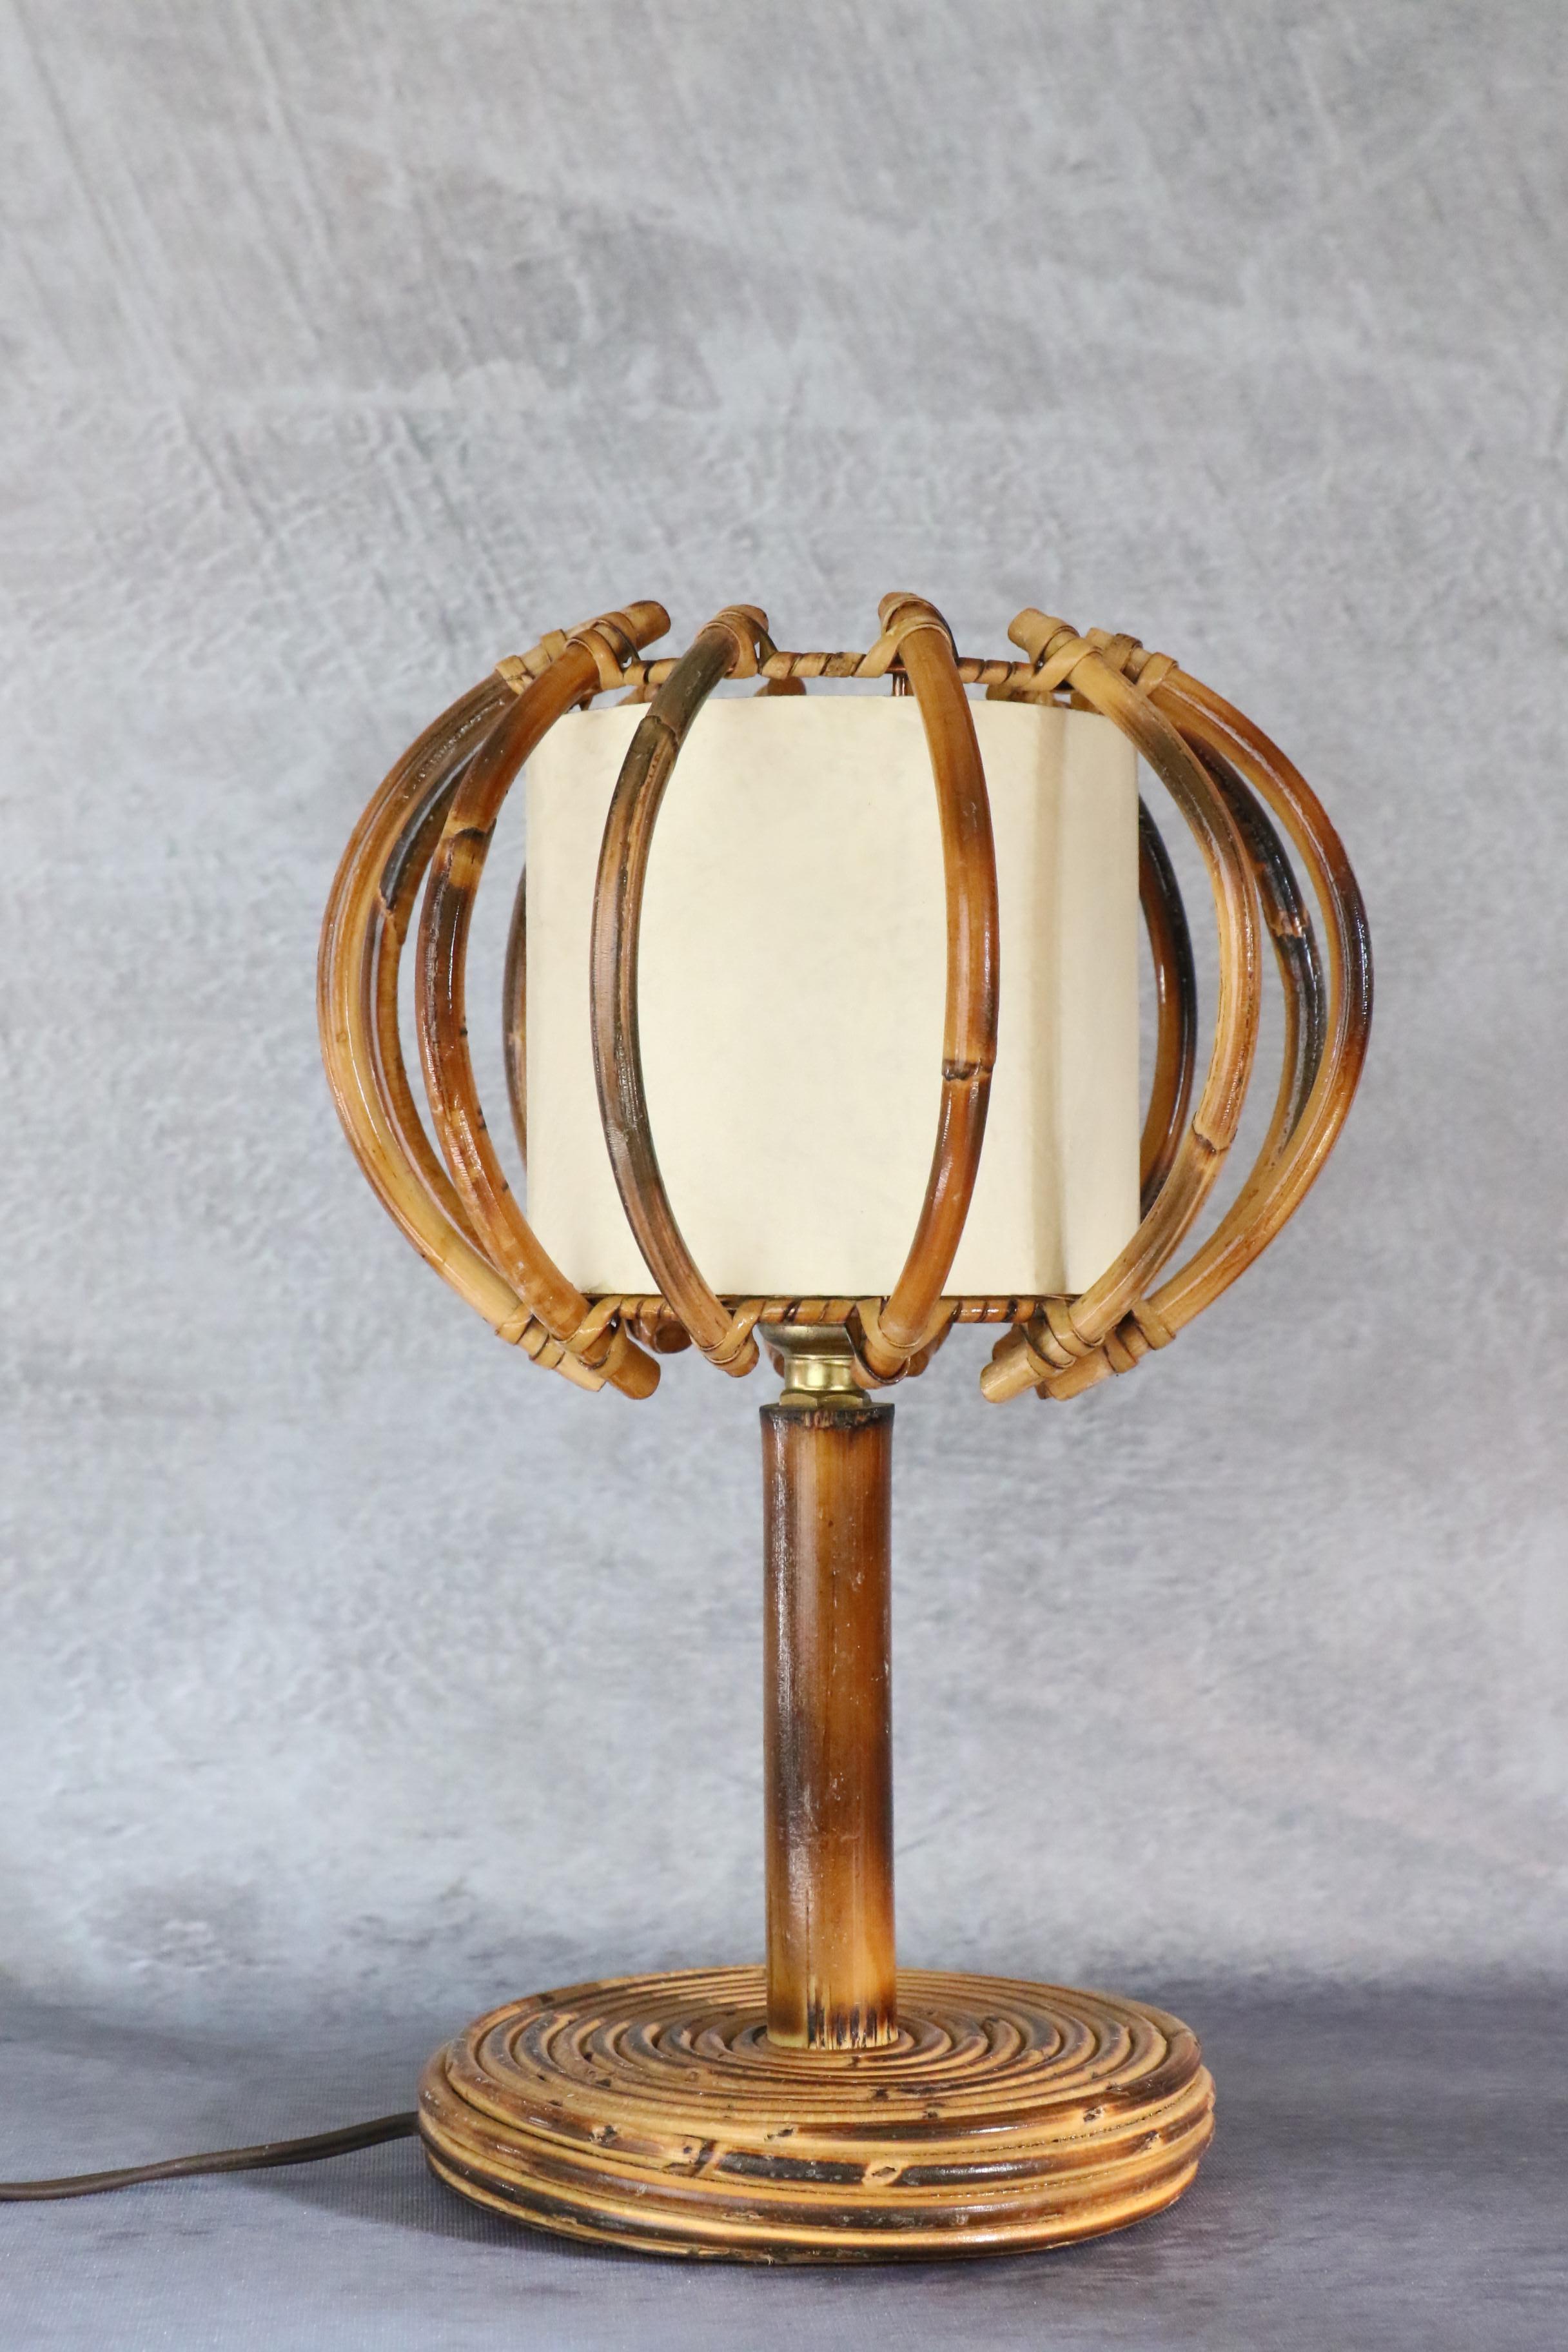 Louis Sognot bamboo and rattan table lamp Mid-Century Modern 1960, France

Very nice lamp by the French designer Louis Sognot. It is very well made. The artist has created many models using bamboo and rattan for the structure of his lamps, sconces